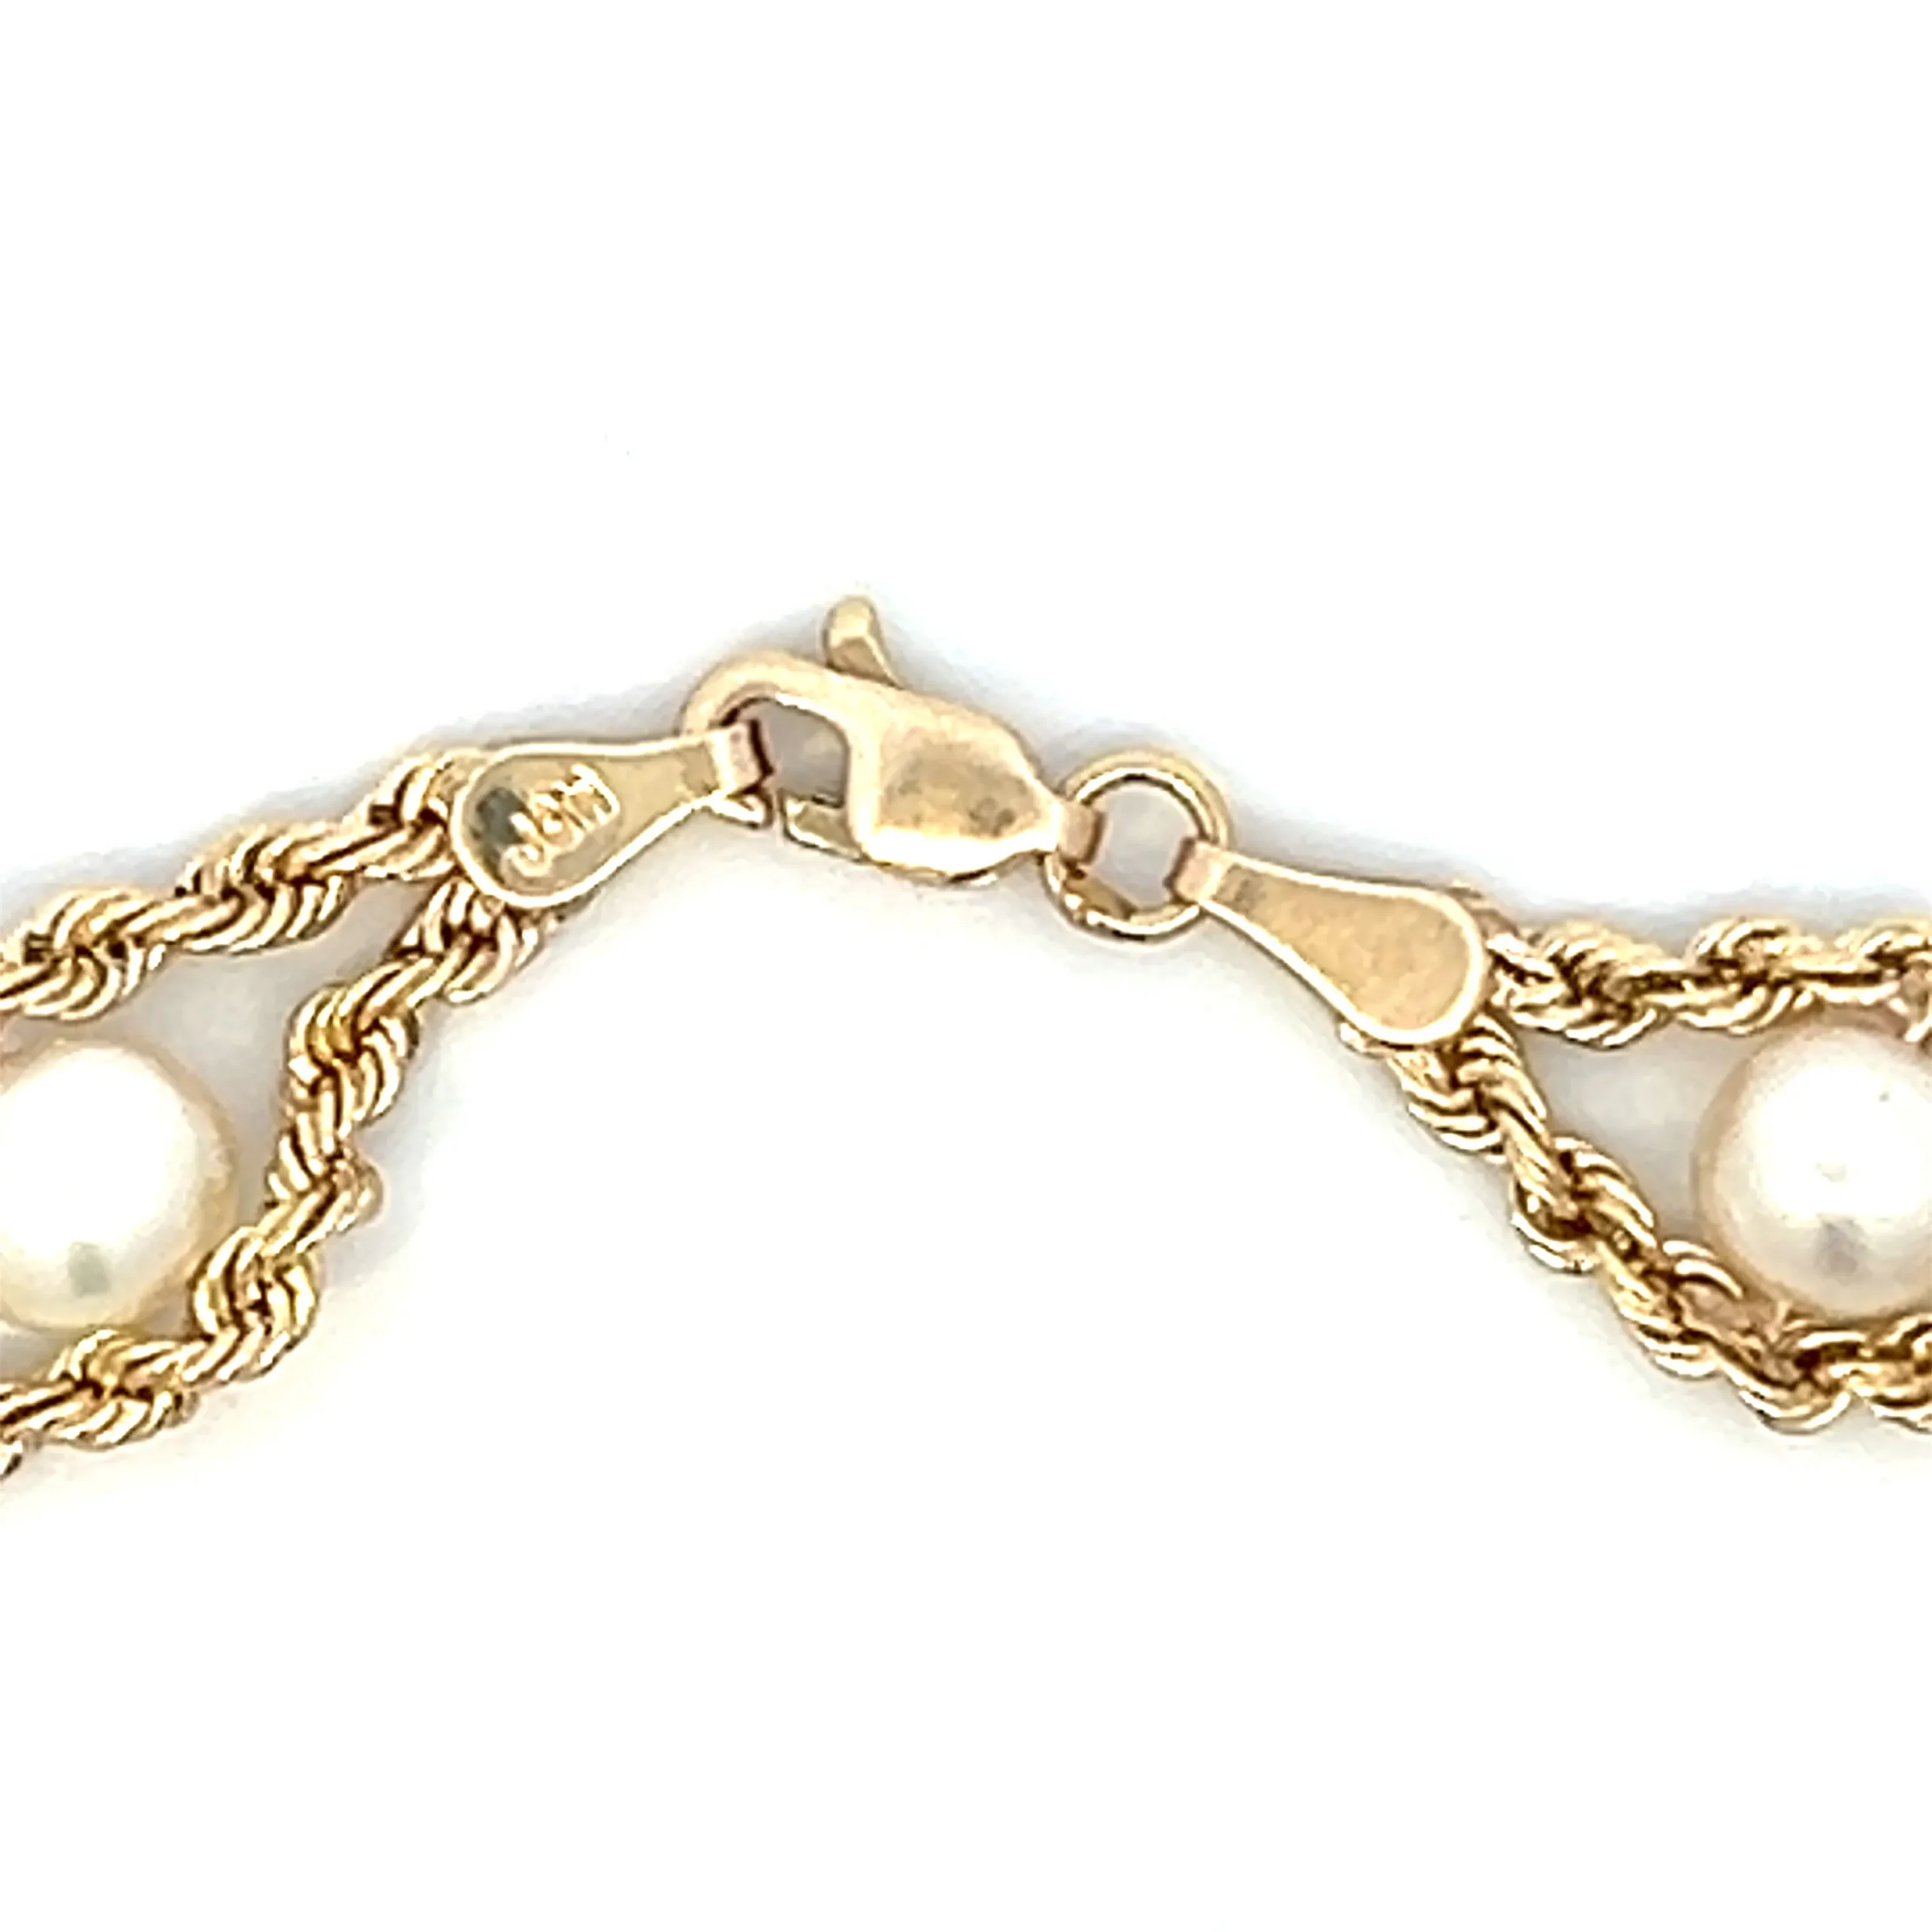 One estate 10 karat yellow gold twin rope chain bracelet containing 8 freshwater cultured white pearls measuring 5.5mm each. The rope chains join between each pearl and then divide to go around each pearl. The bracelet measures 7" long and has a lobster claw clasp.